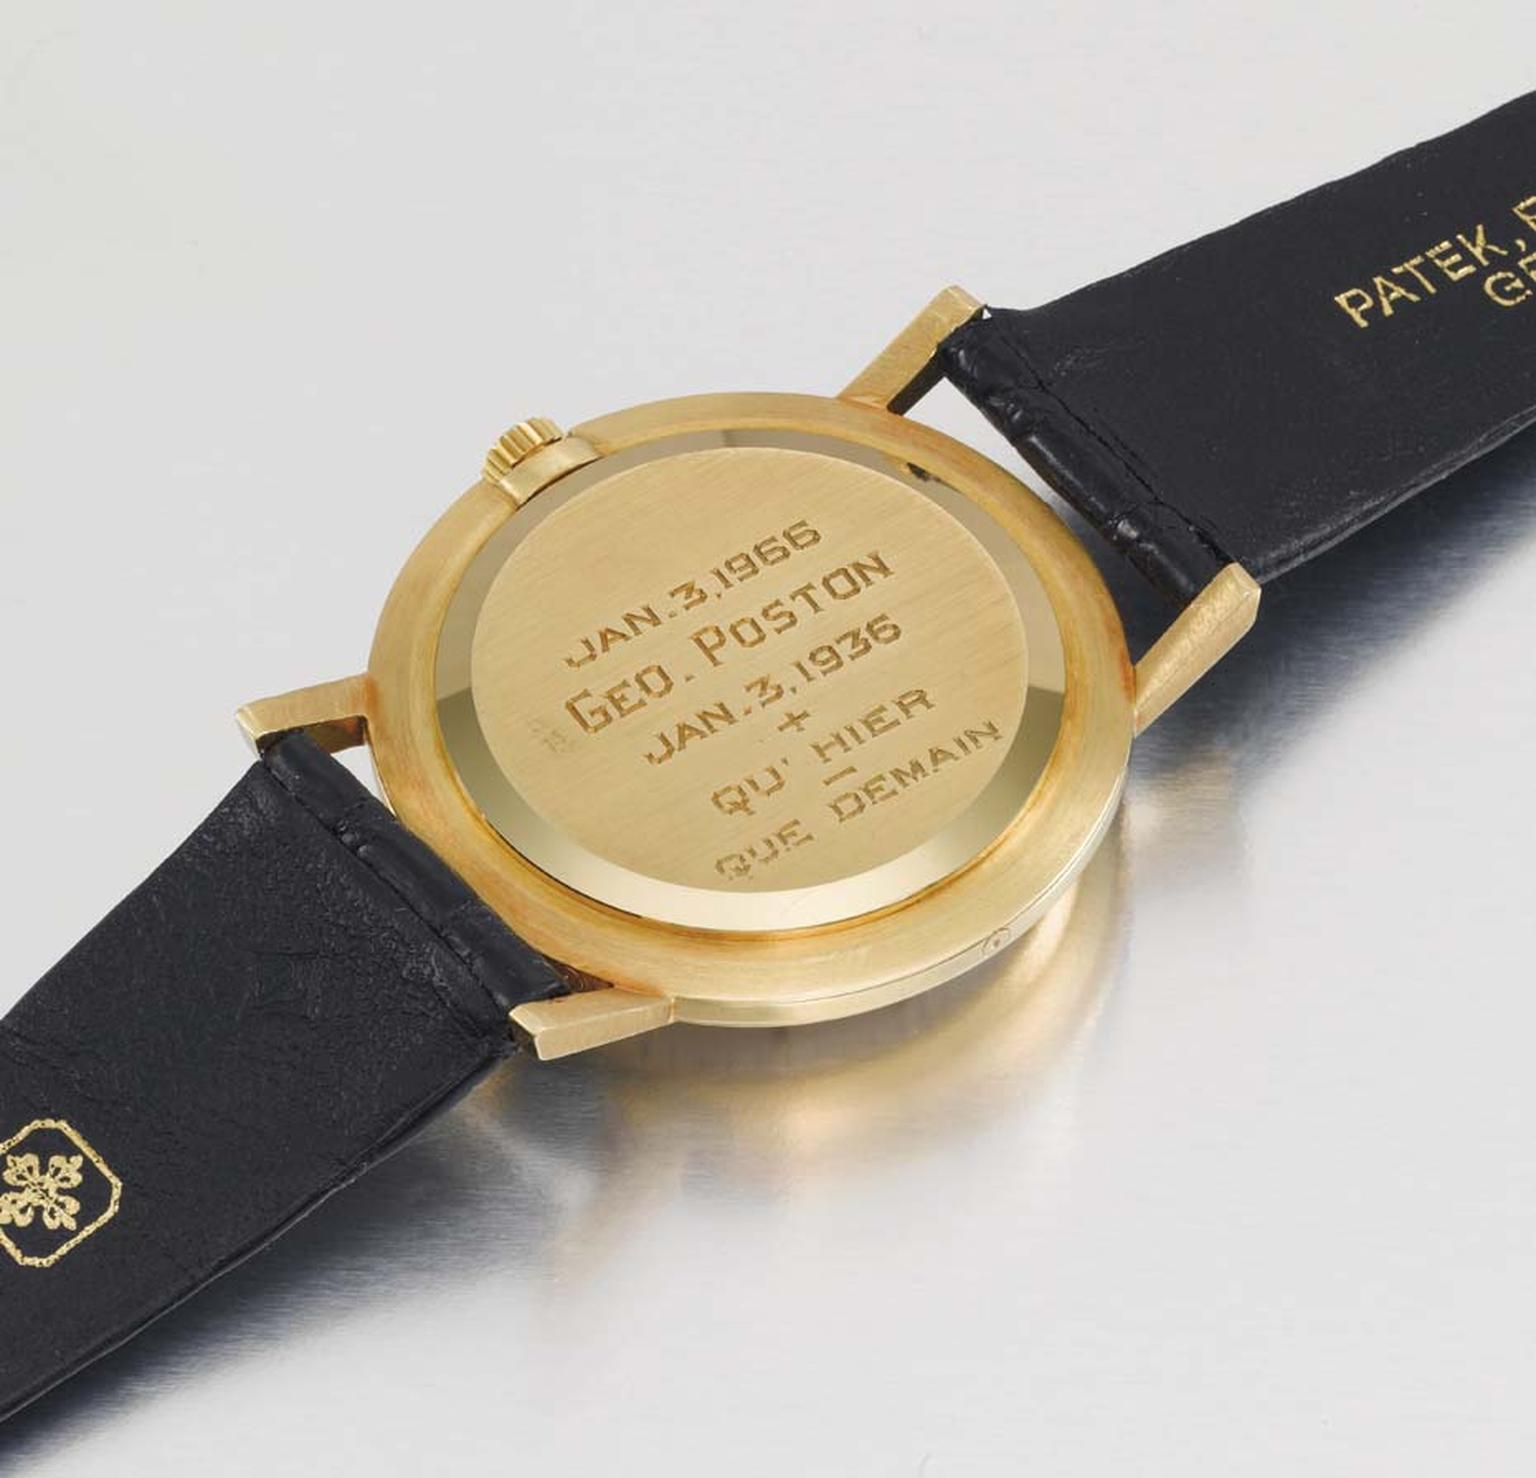 Patek Philippe's "Tre Scalini" Ref 3449 watch comes to Christie's in remarkable condition, with a pre-sale estimate of US$ 1-2 million.